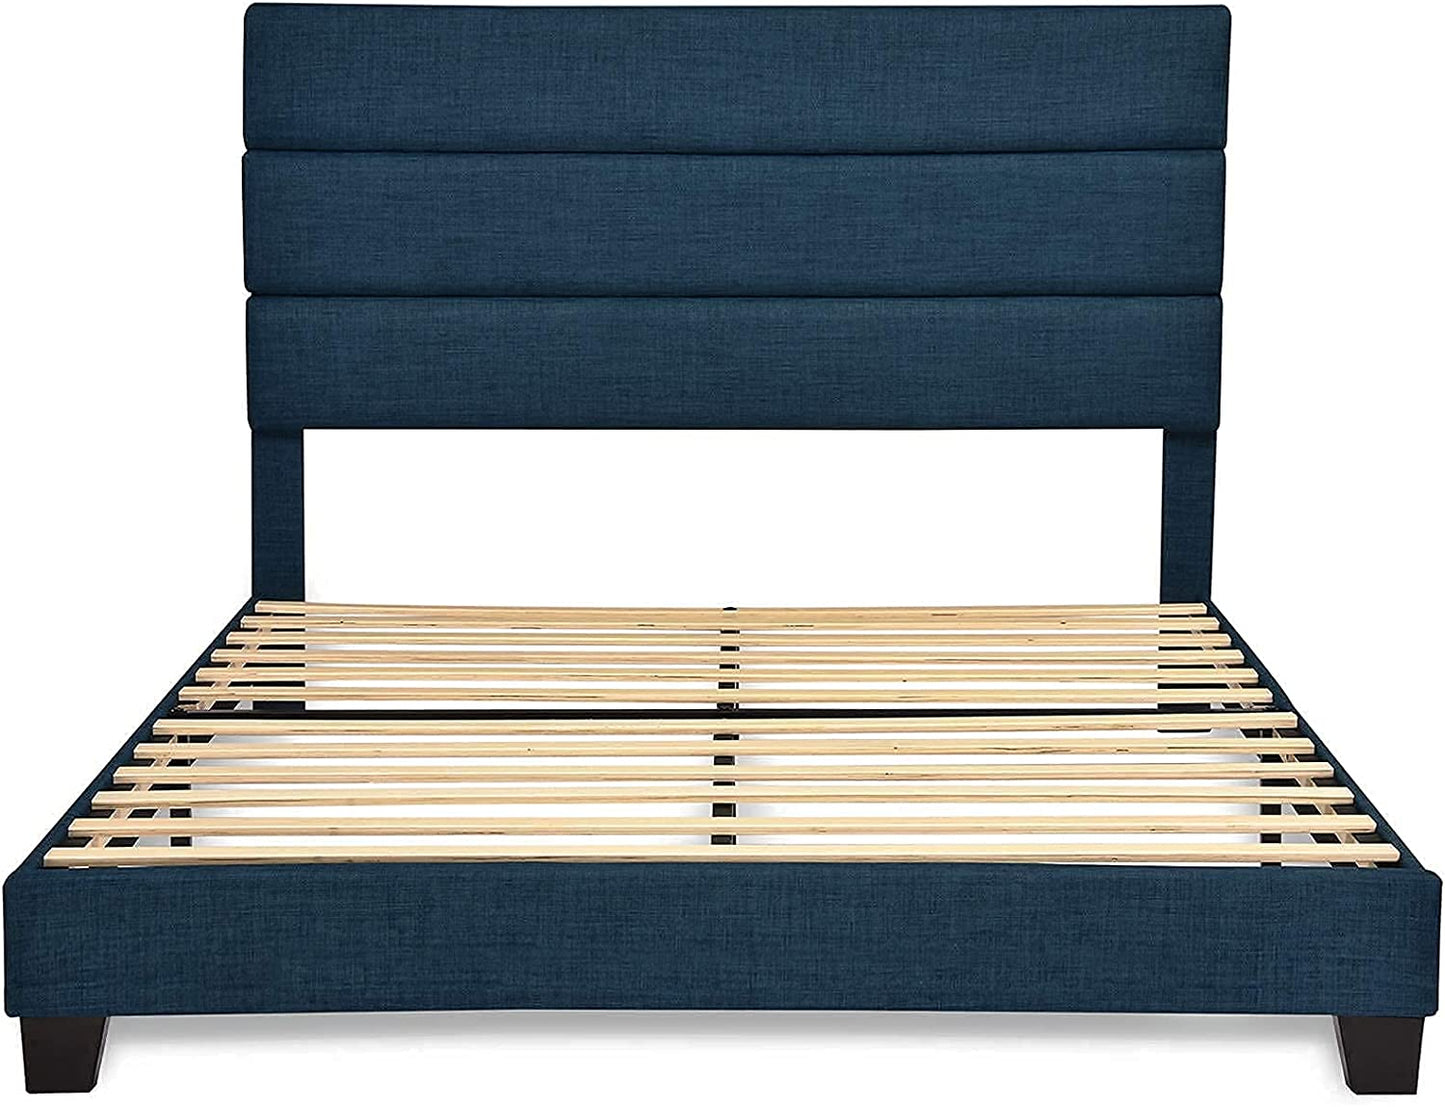 Allewie Queen Size Fabric Fully Upholstered Platform Bed Frame with Headboard and Strong Wooden Slats, Navy Blue